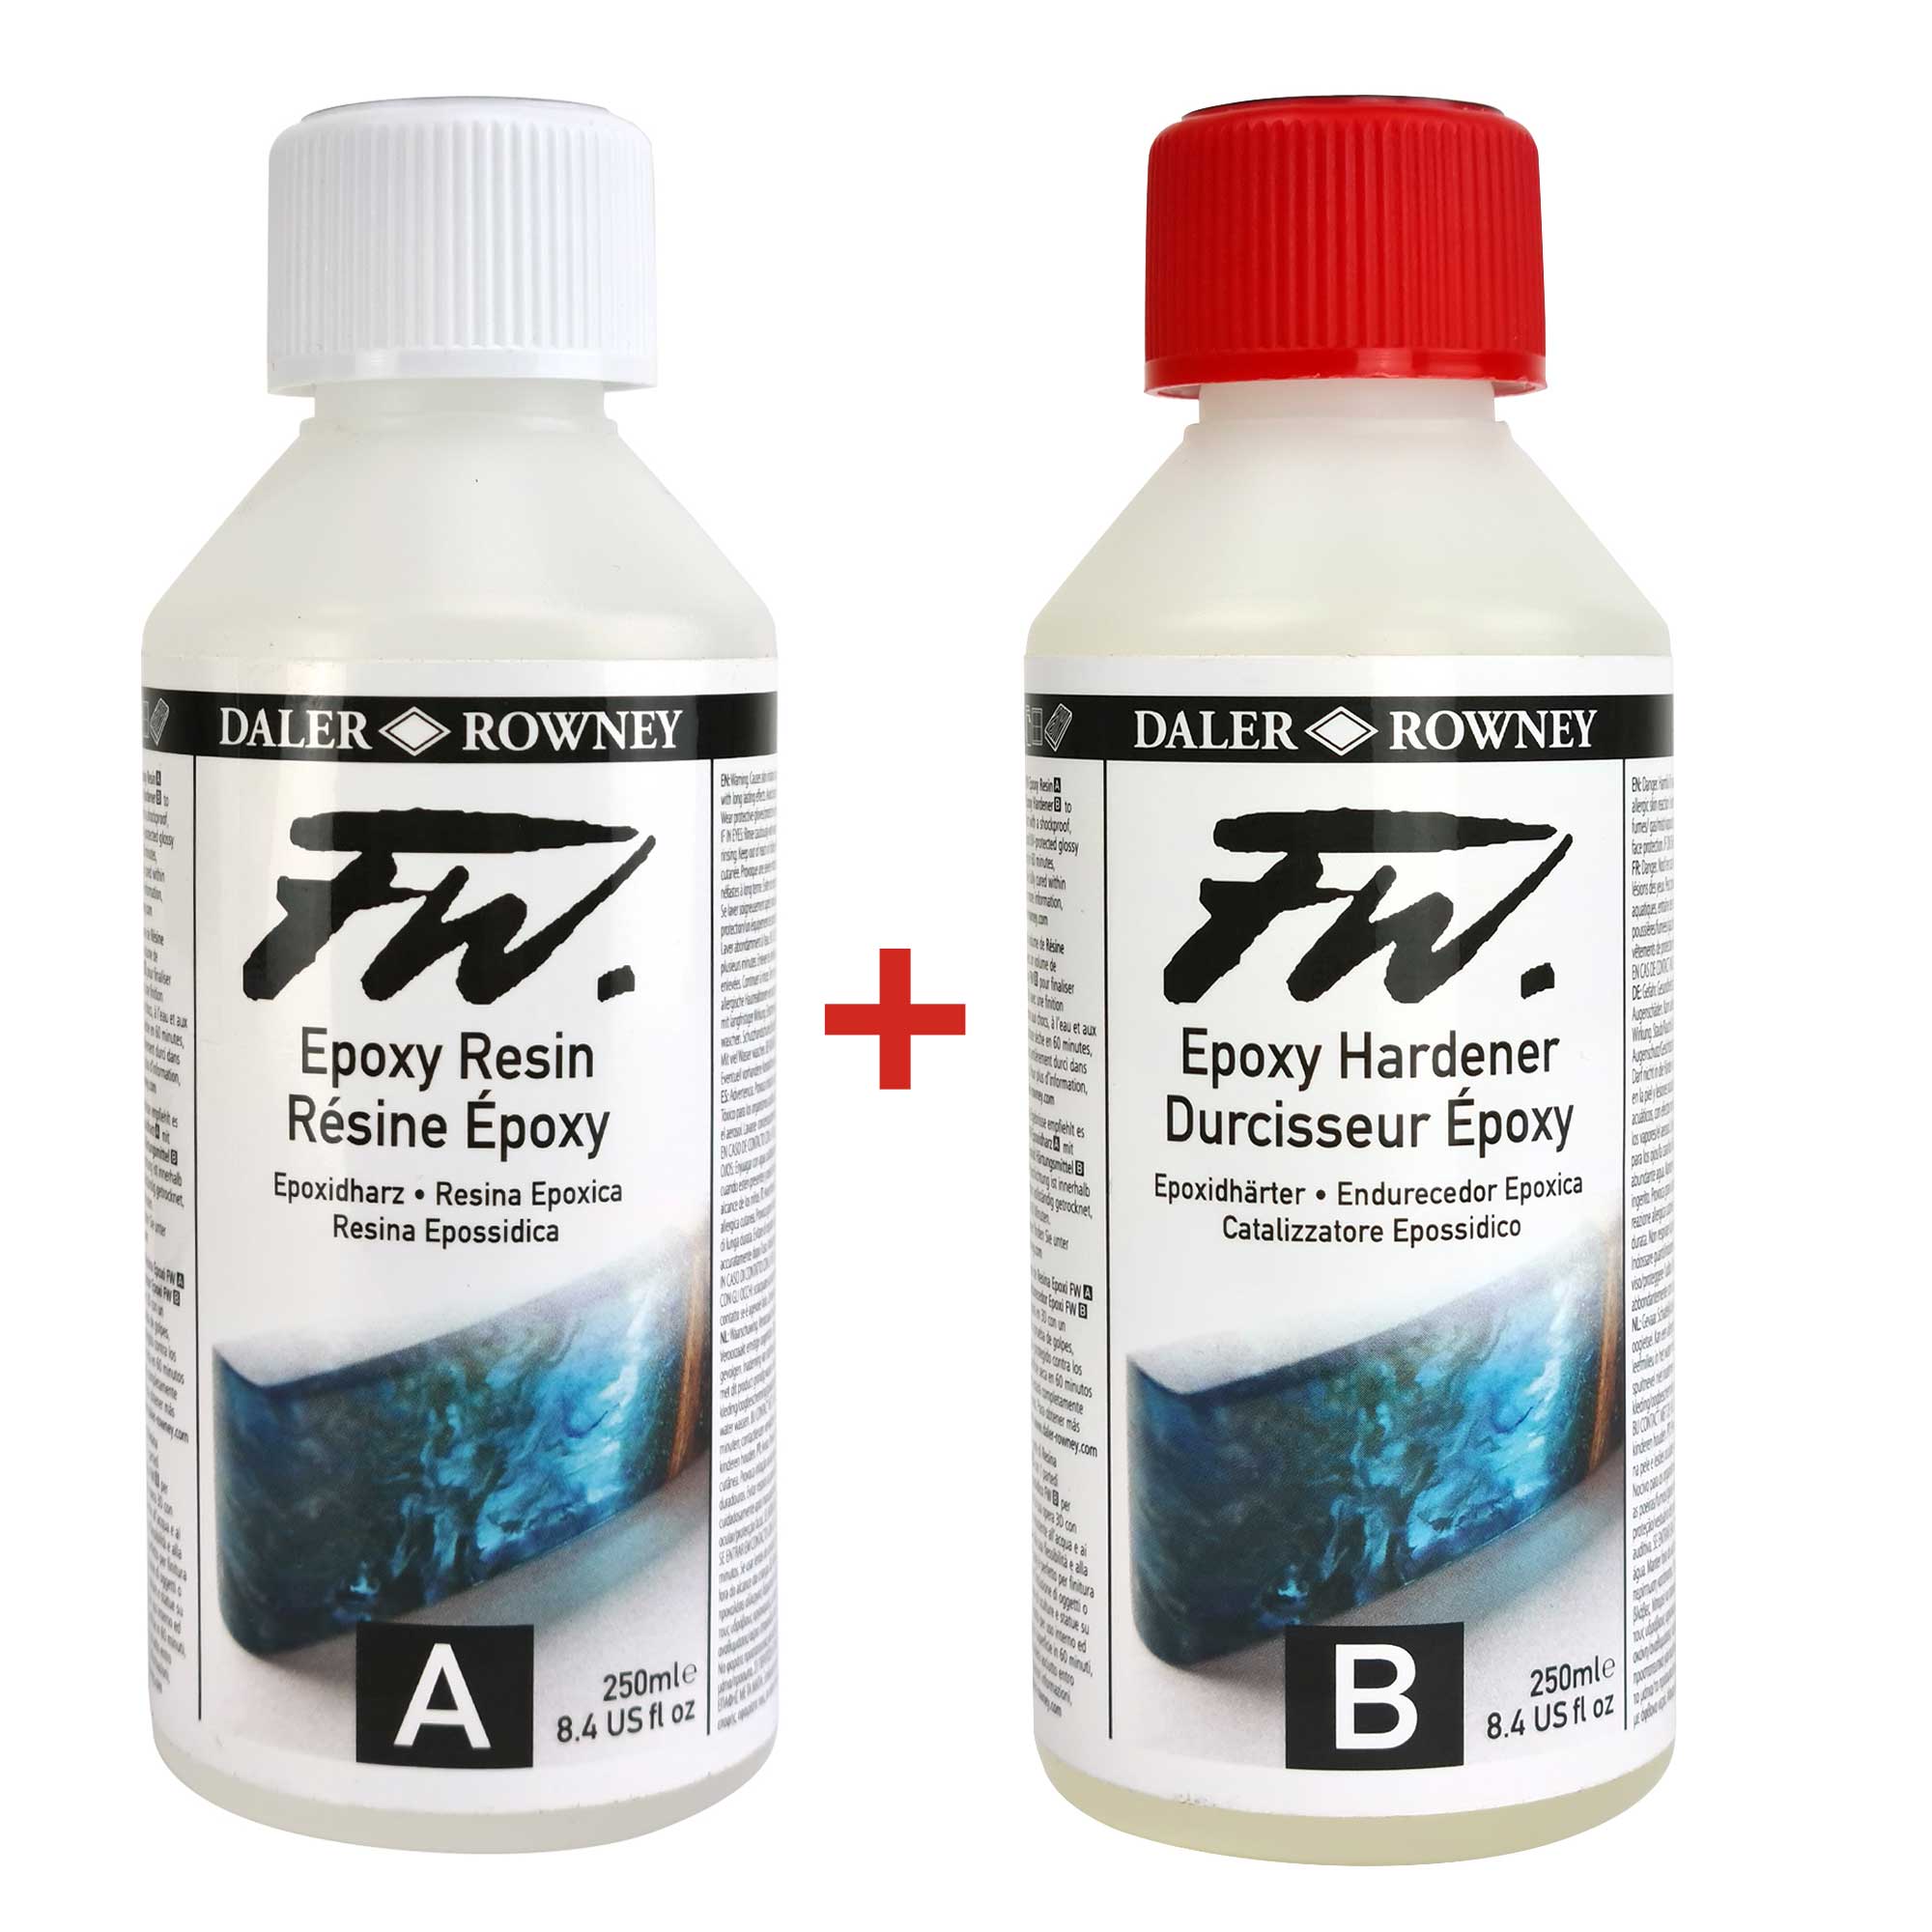 Daler-Rowney FW Epoxy Resin (A) and Hardener (B)